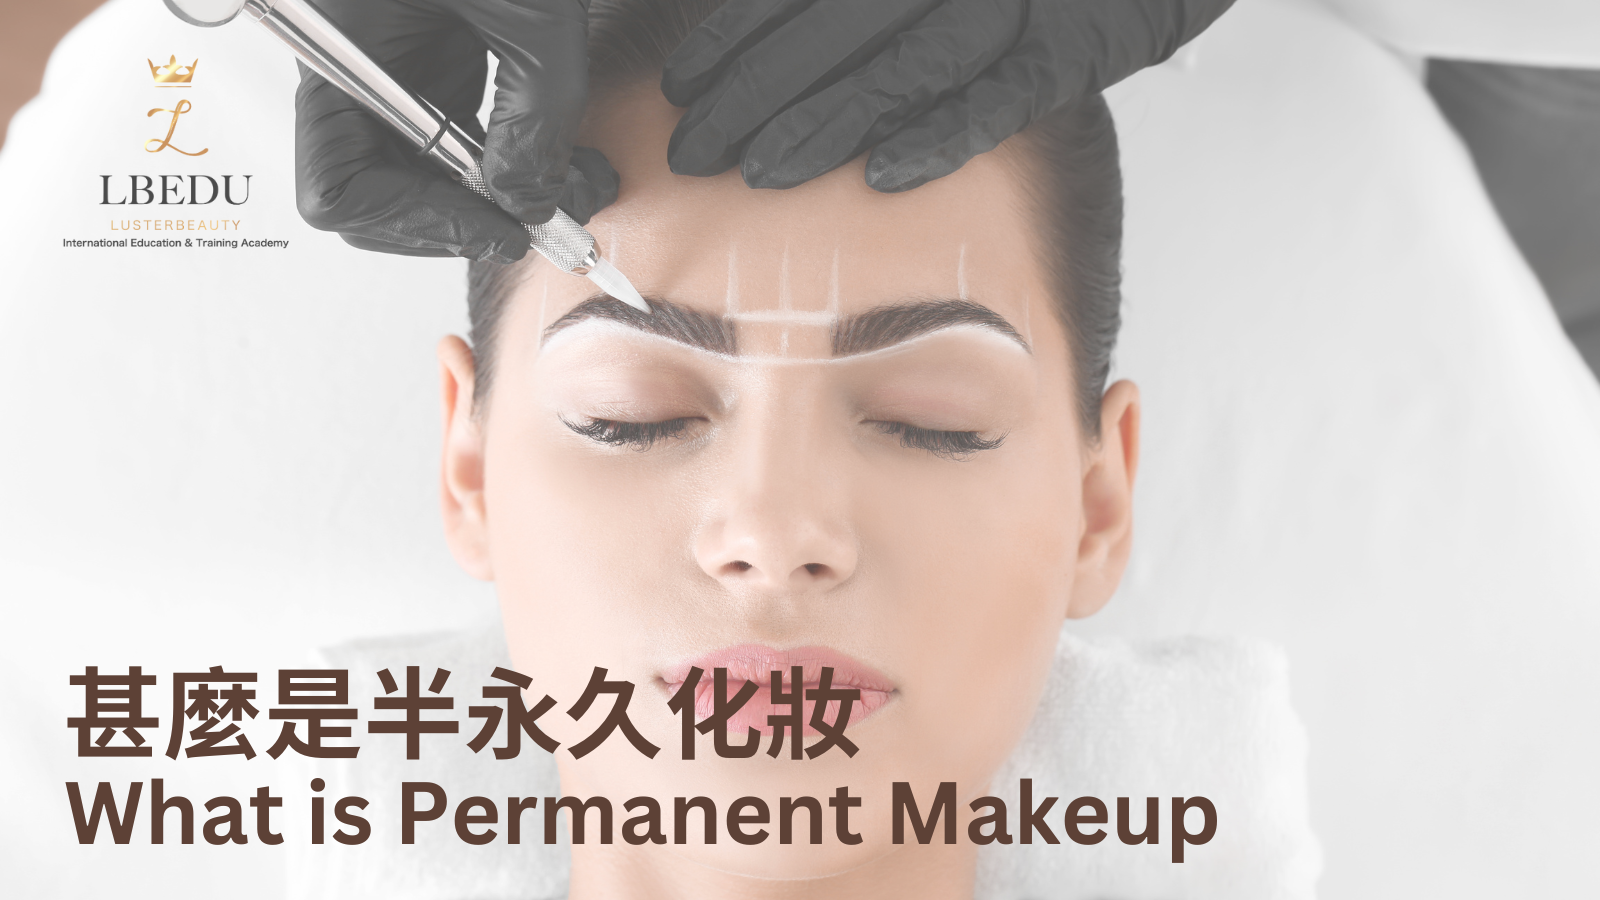 What is Permanent Makeup